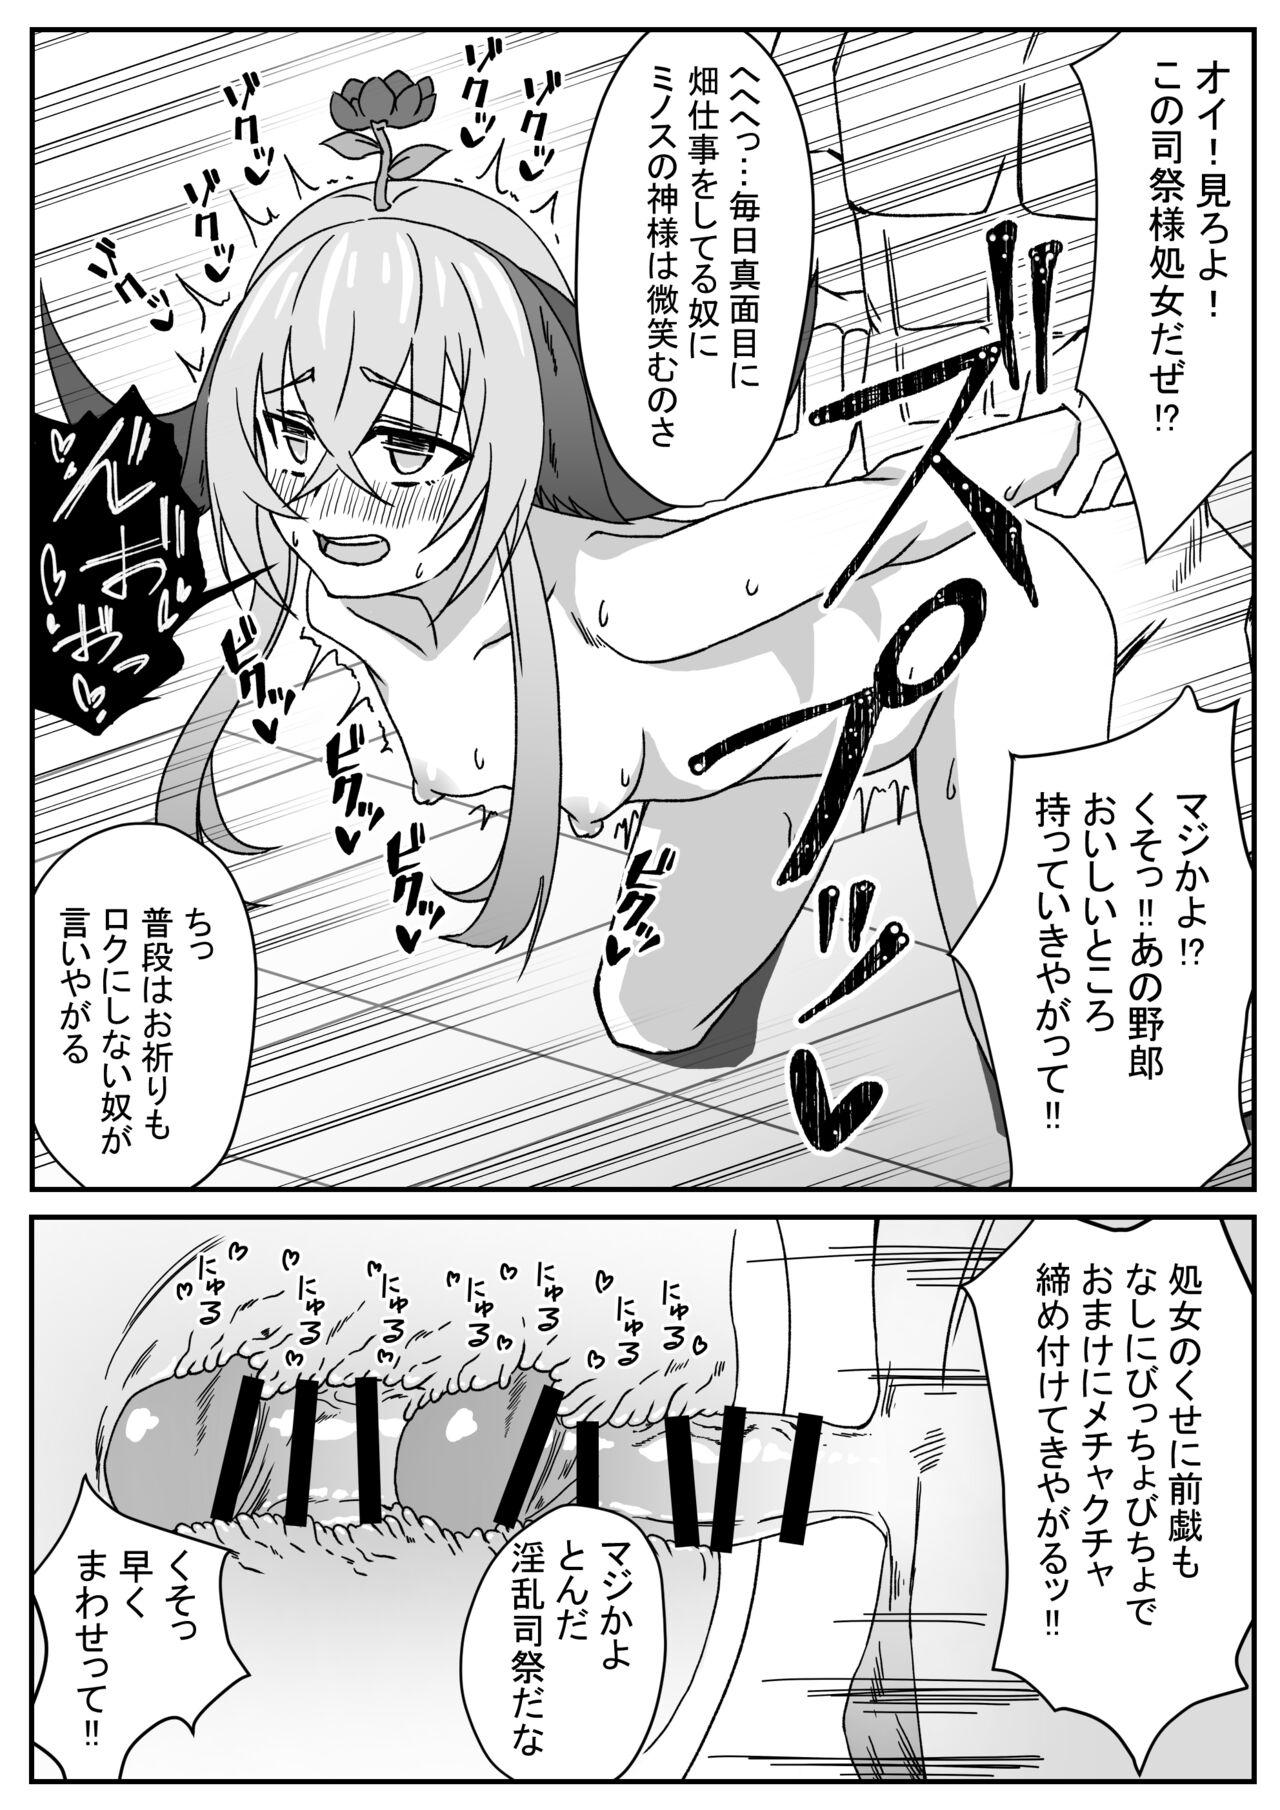 Moaning Pallas no Oshigoto - Arknights Private Sex - Page 6